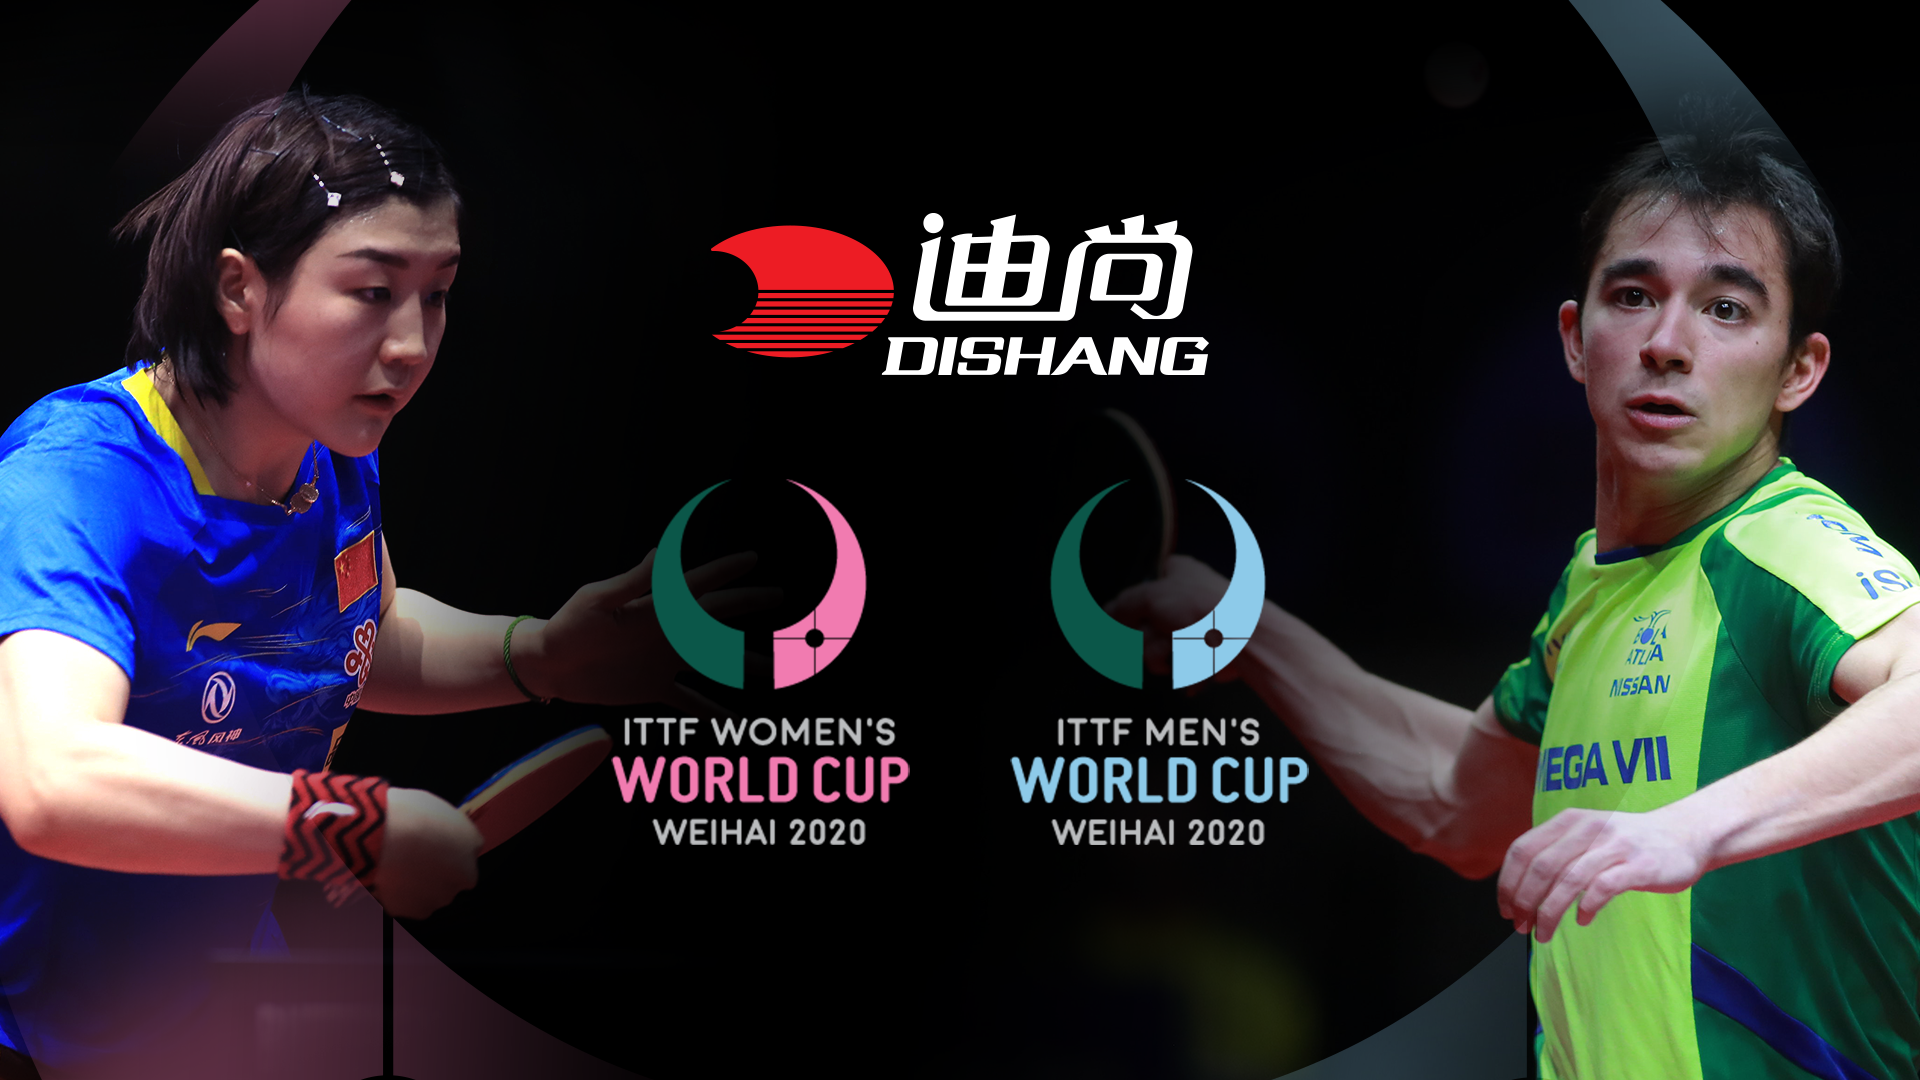 Dishang Group to be title sponsor of ITTF World Cups in Weihai